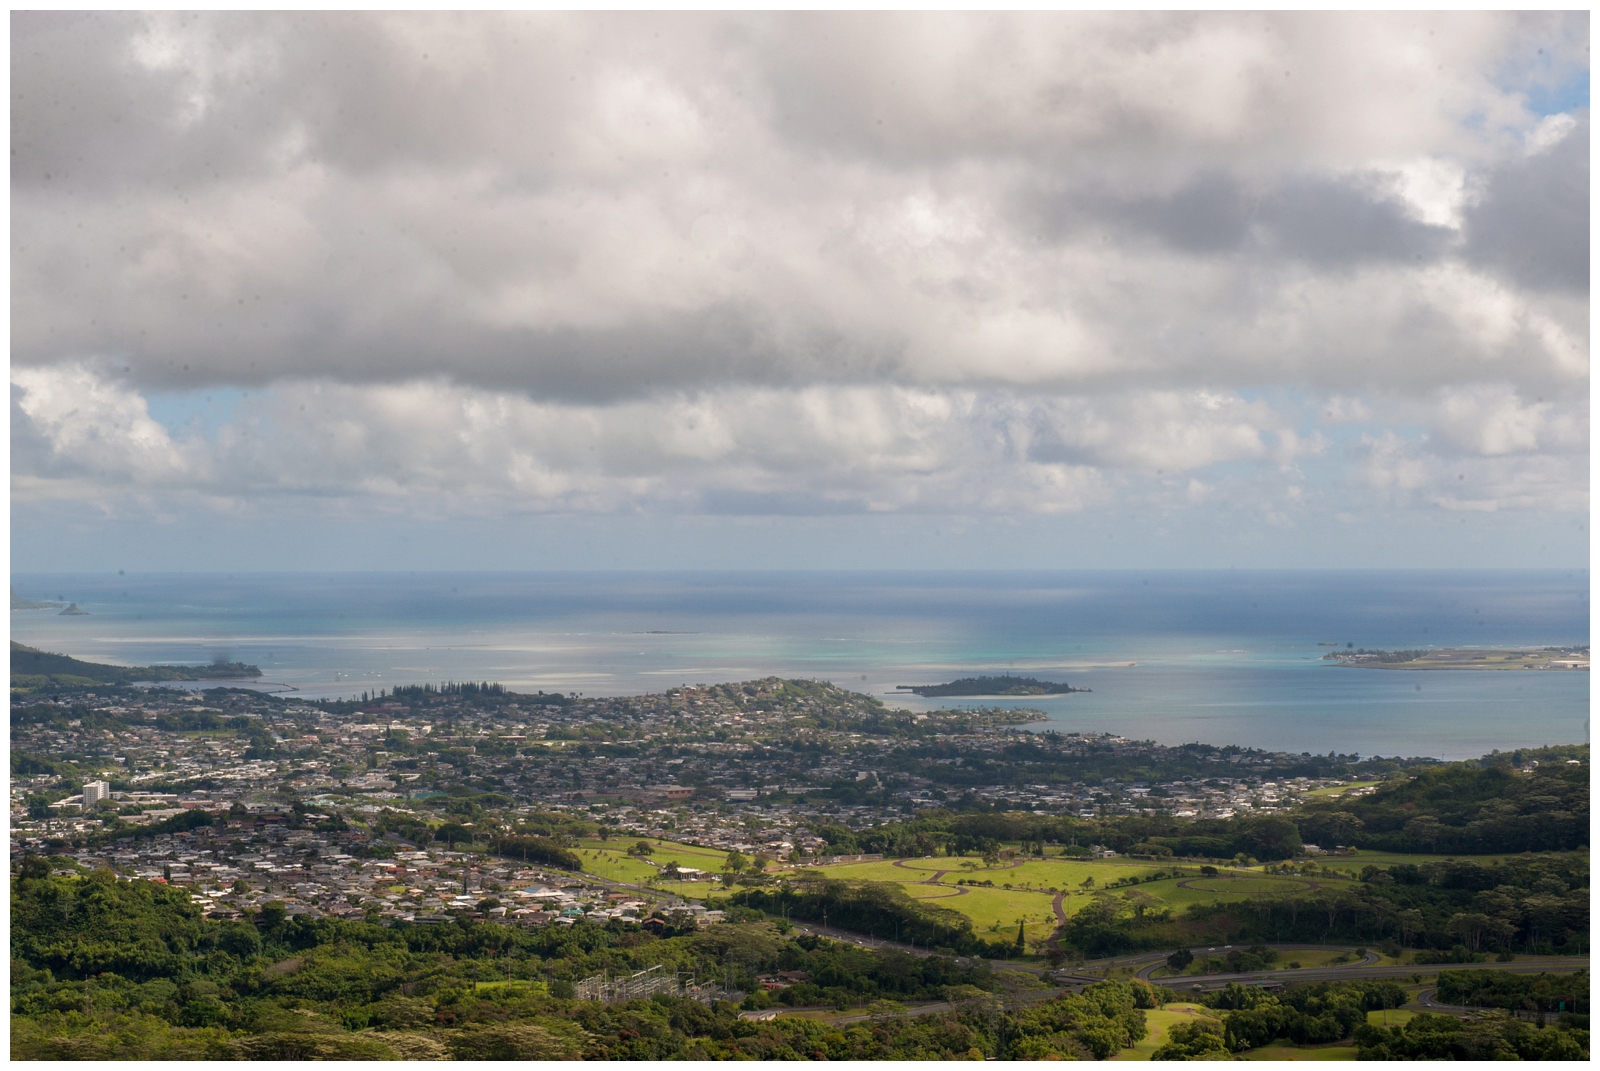 Looking out to the ocean from Pali Lookout with the cliff and bees on Oahu hawaii